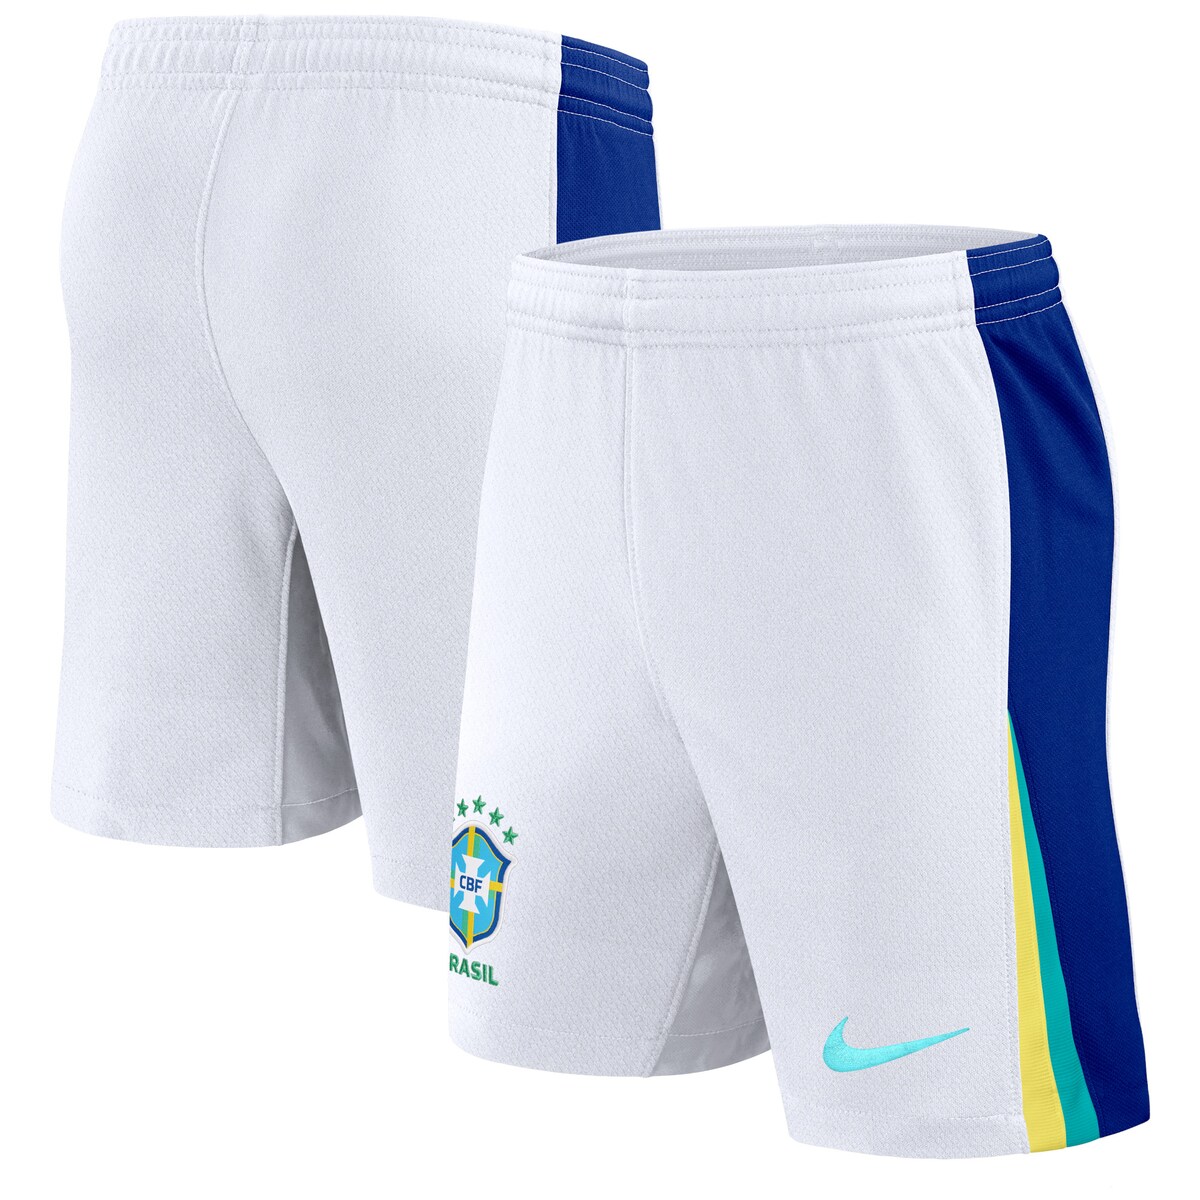 Unleash your Brazil National Team devotion on match day with these 2024 Away Stadium Shorts from Nike. The elastic waistband guarantees a comfortable fit each time. The Dri-FIT technology wicks away sweat and keeps you dry whether you're relaxing at home, going for a run or honing your skills on the pitch.Elastic waistbandOfficially licensedContrast-color side seam insetsDri-FIT technology wicks away moistureImportedBrand: NikeInseam on size M measures approx. 8"Slim fitEmbroidered graphicsMachine wash, tumble dry lowMaterial: 100% PolyesterMove To Zero is Nike's journey toward zero carbon and zero waste to help protect the future of sport. Apparel labeled sustainable materials is made with at least 55% recycled content.Embroidered fabric applique